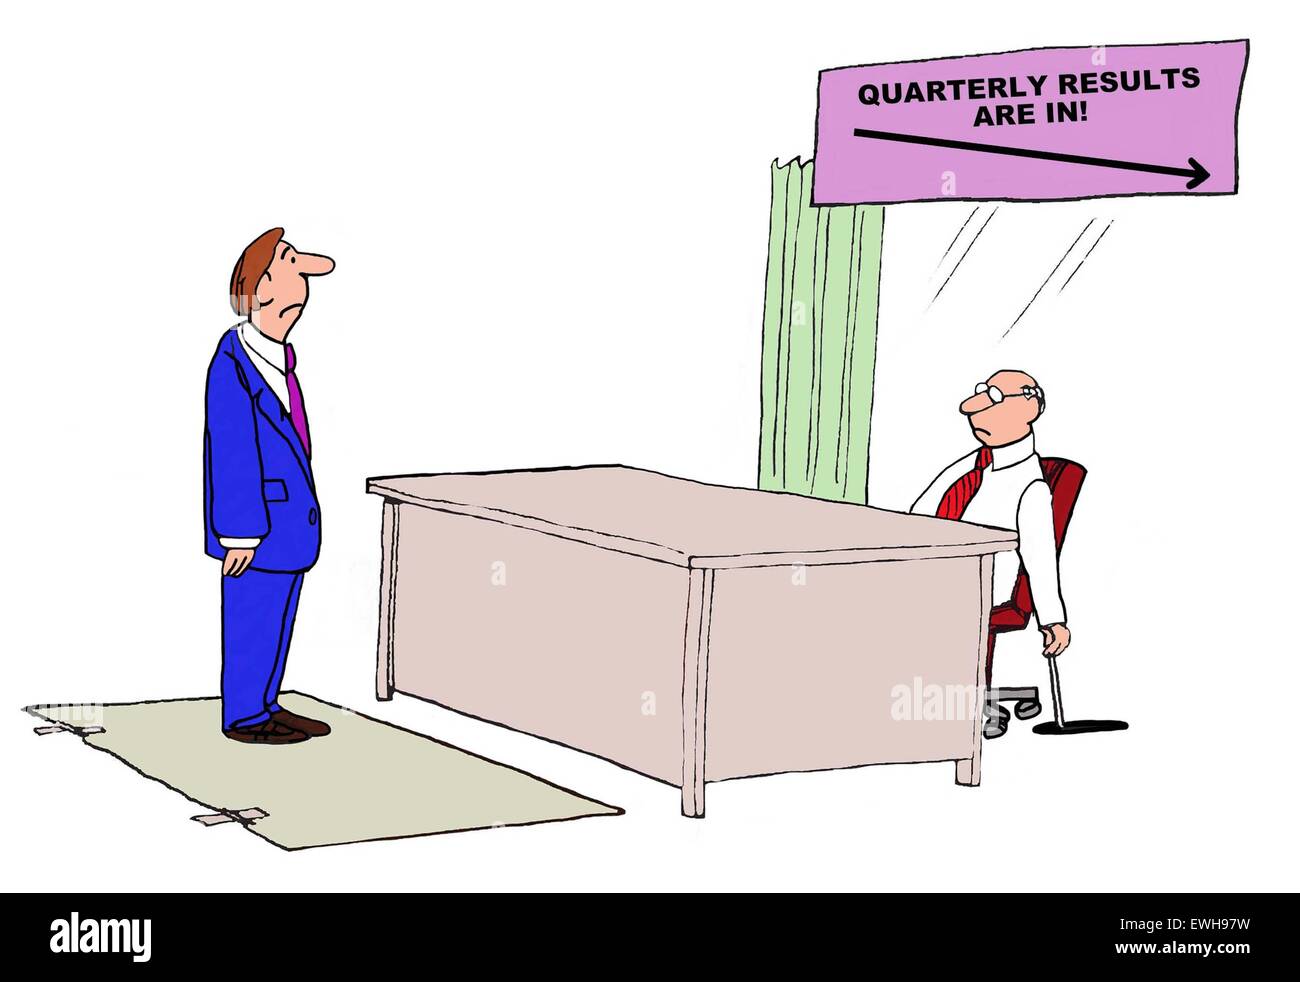 Business cartoon of manager looking at sign showing quarterly results are down and boss pulling open trap door. Stock Photo